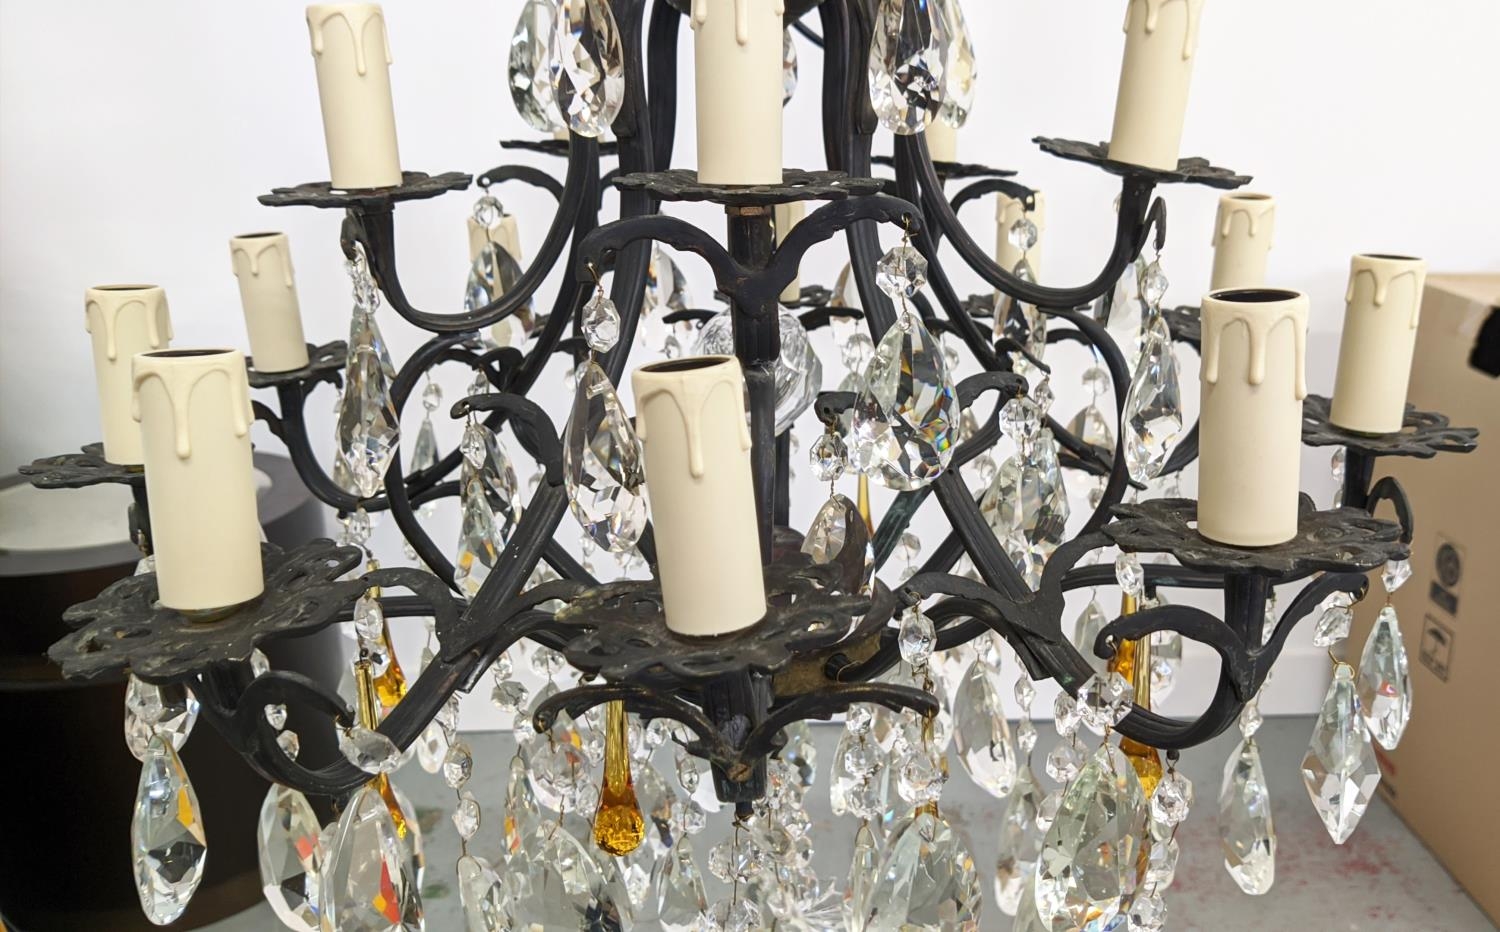 CHANDELIER, patinated metal with clear and amber glass drops from fifteen lights, 60cm W x 114cm - Image 10 of 18